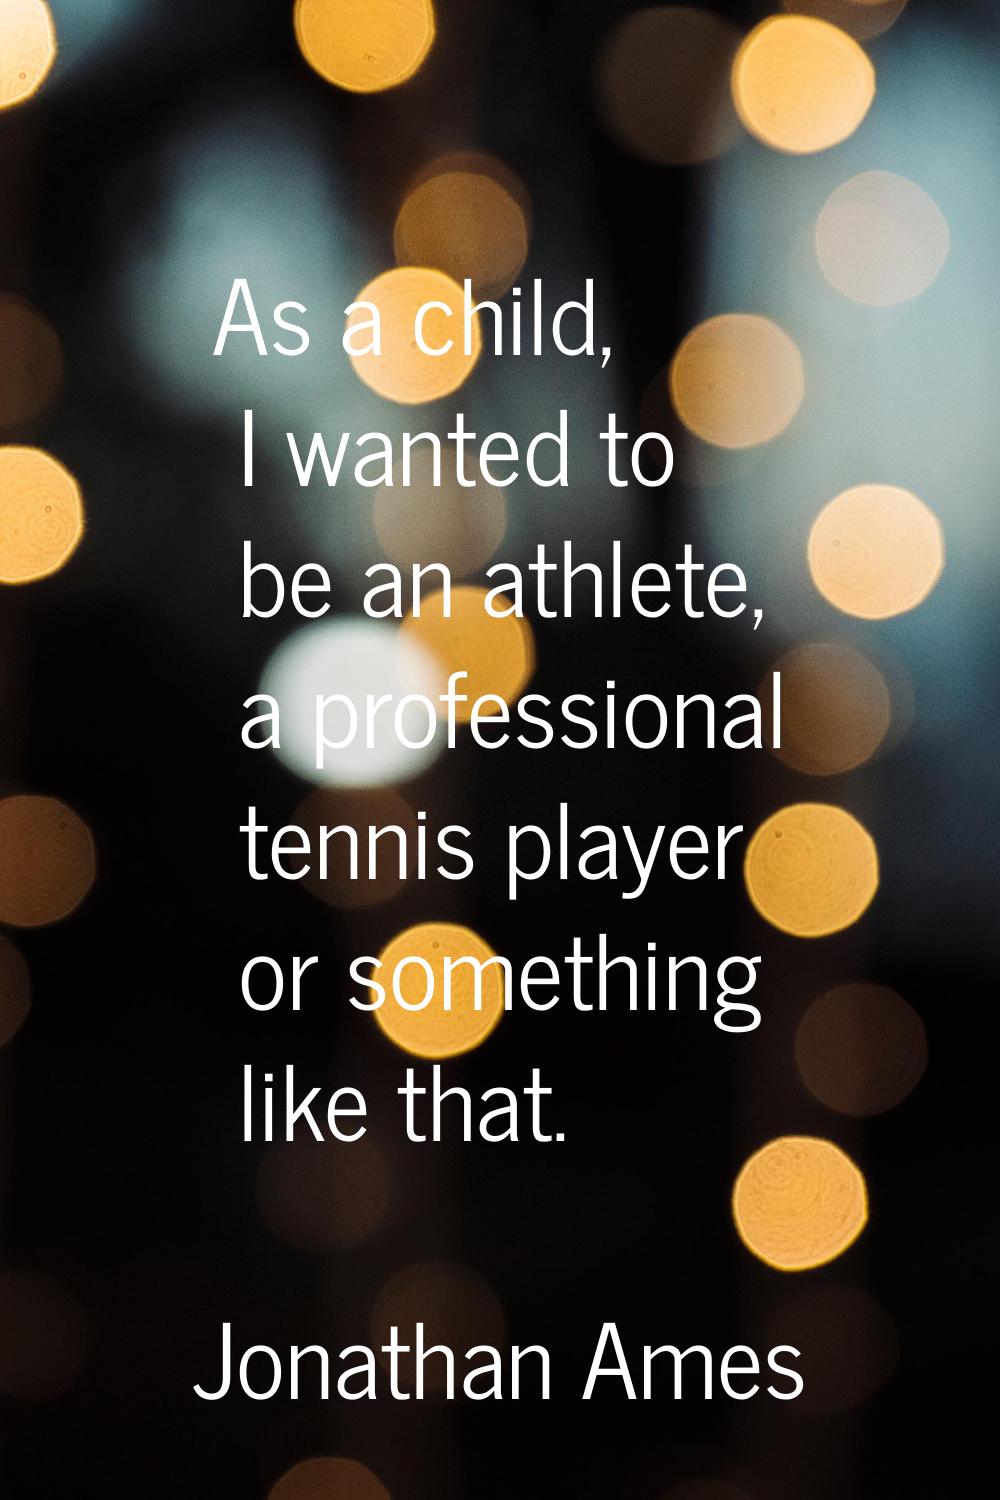 As a child, I wanted to be an athlete, a professional tennis player or something like that.